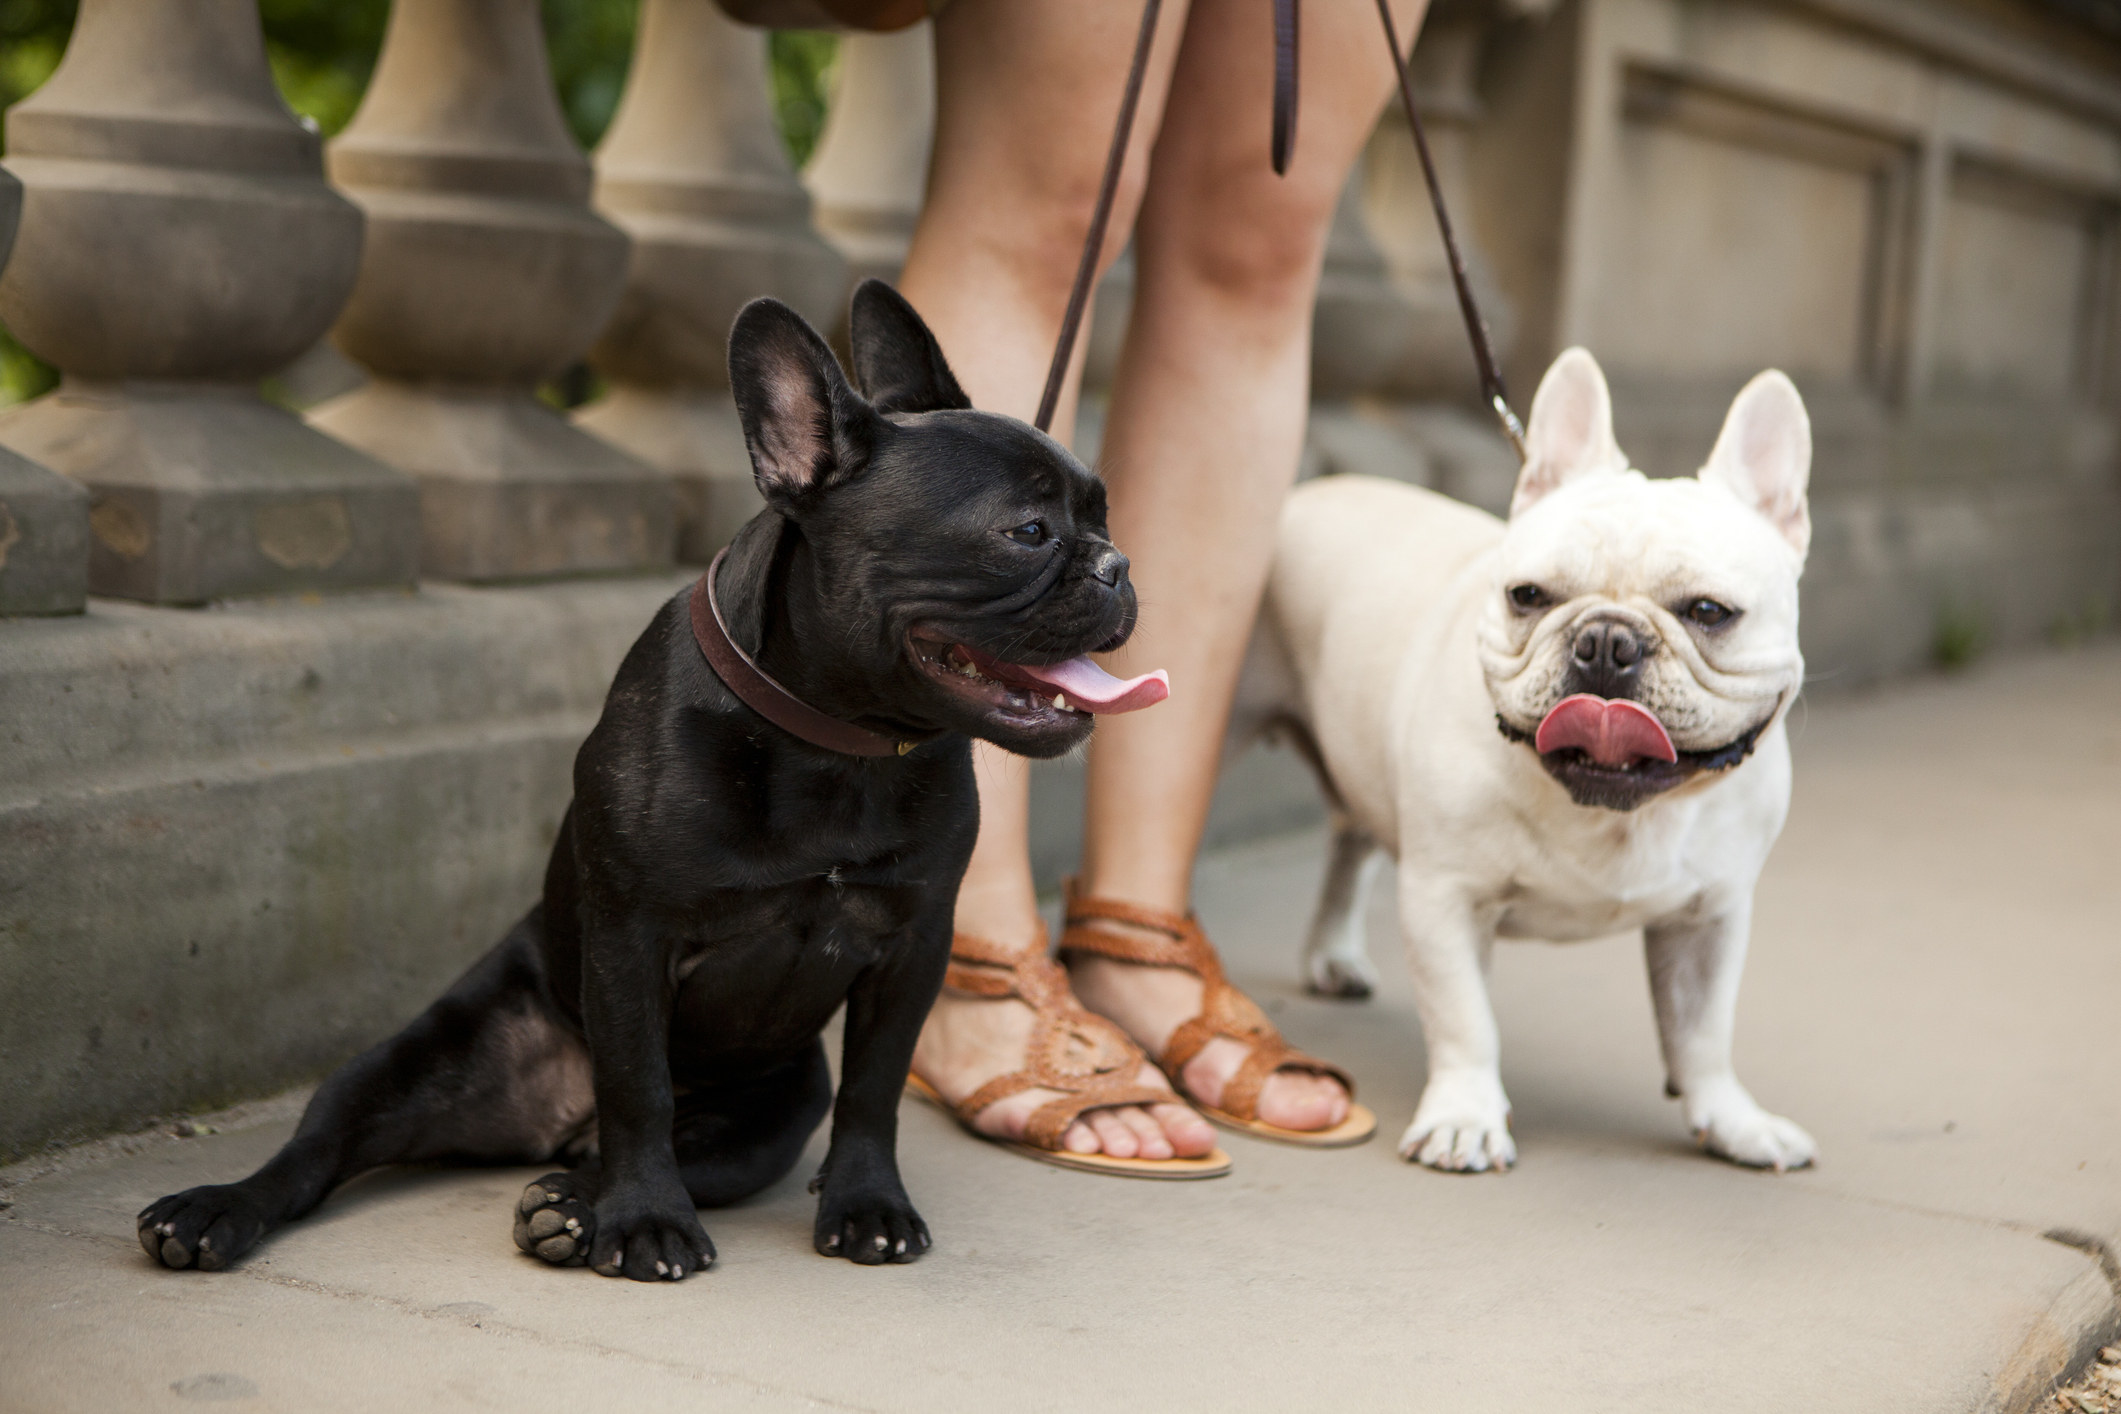 Two French bulldogs next to a woman